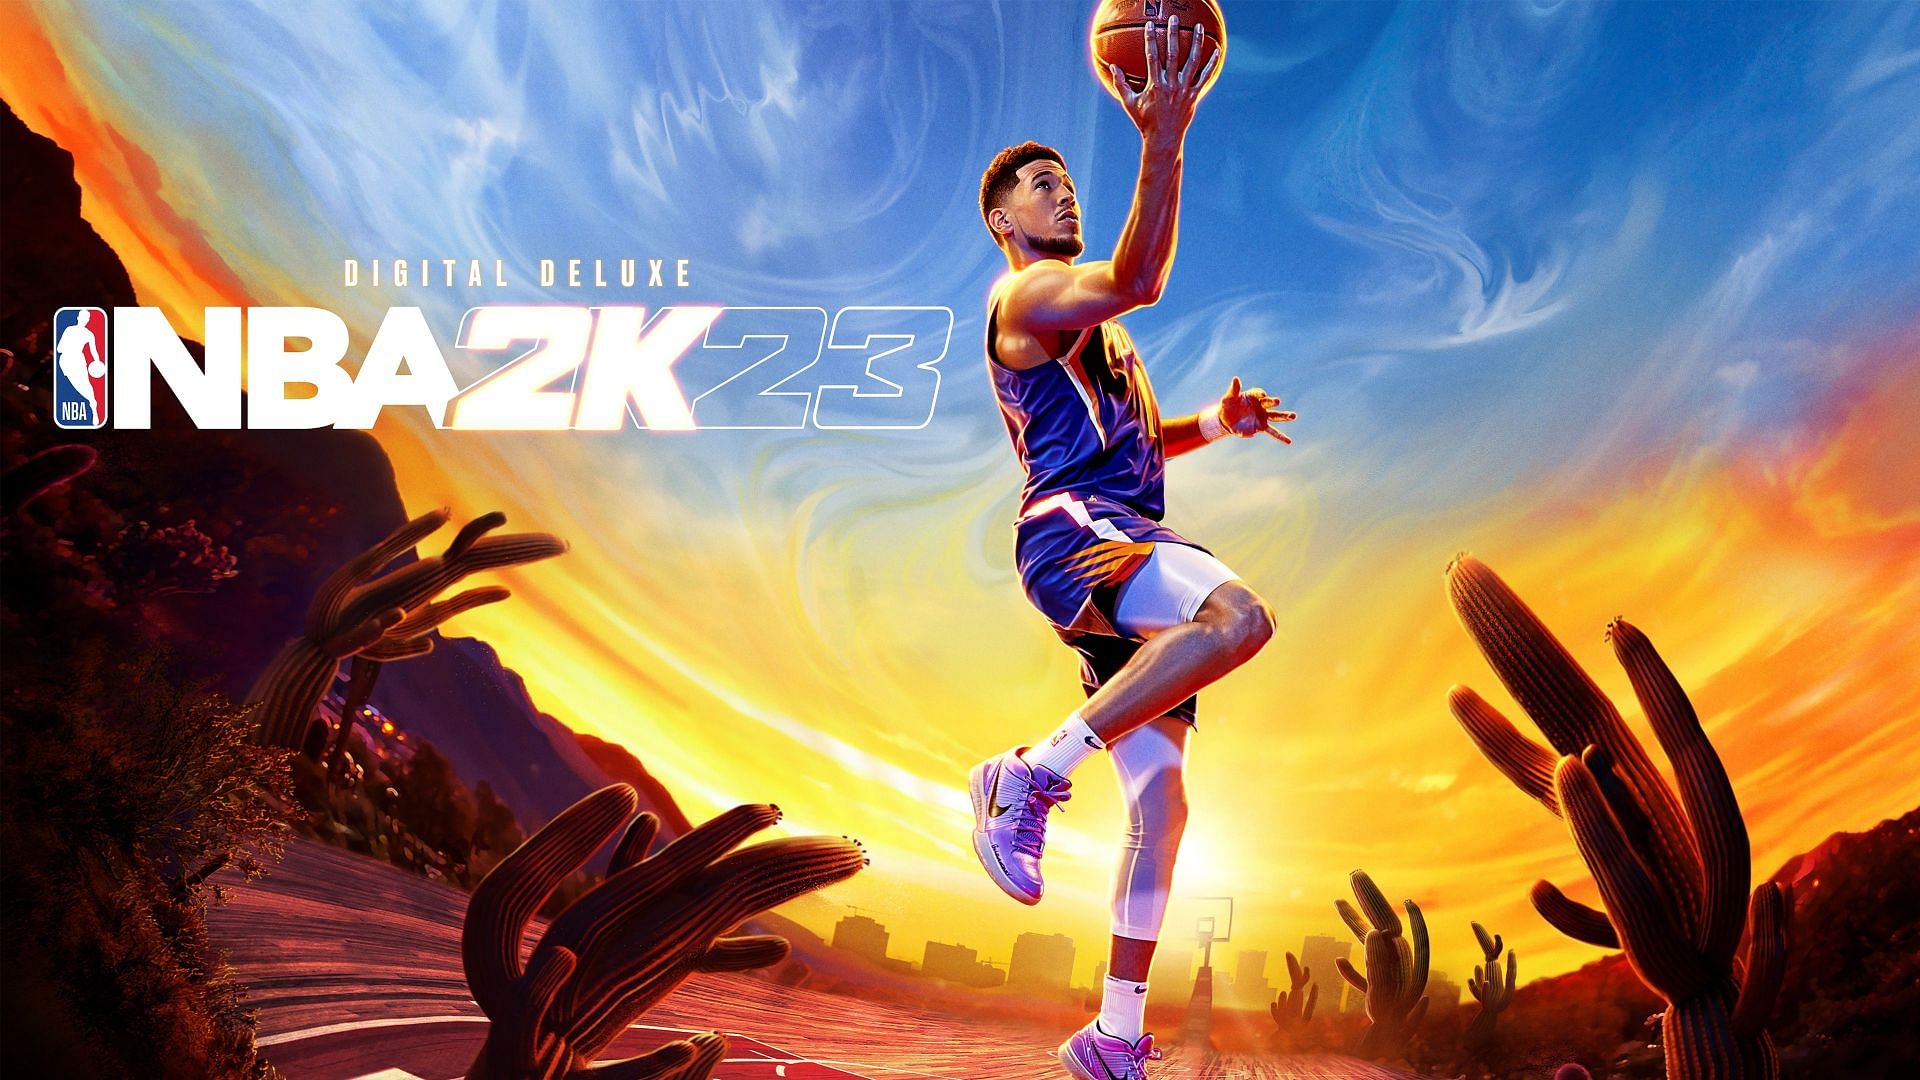 Green and gold comes to NBA 2K23 with addition of Boomers uniform